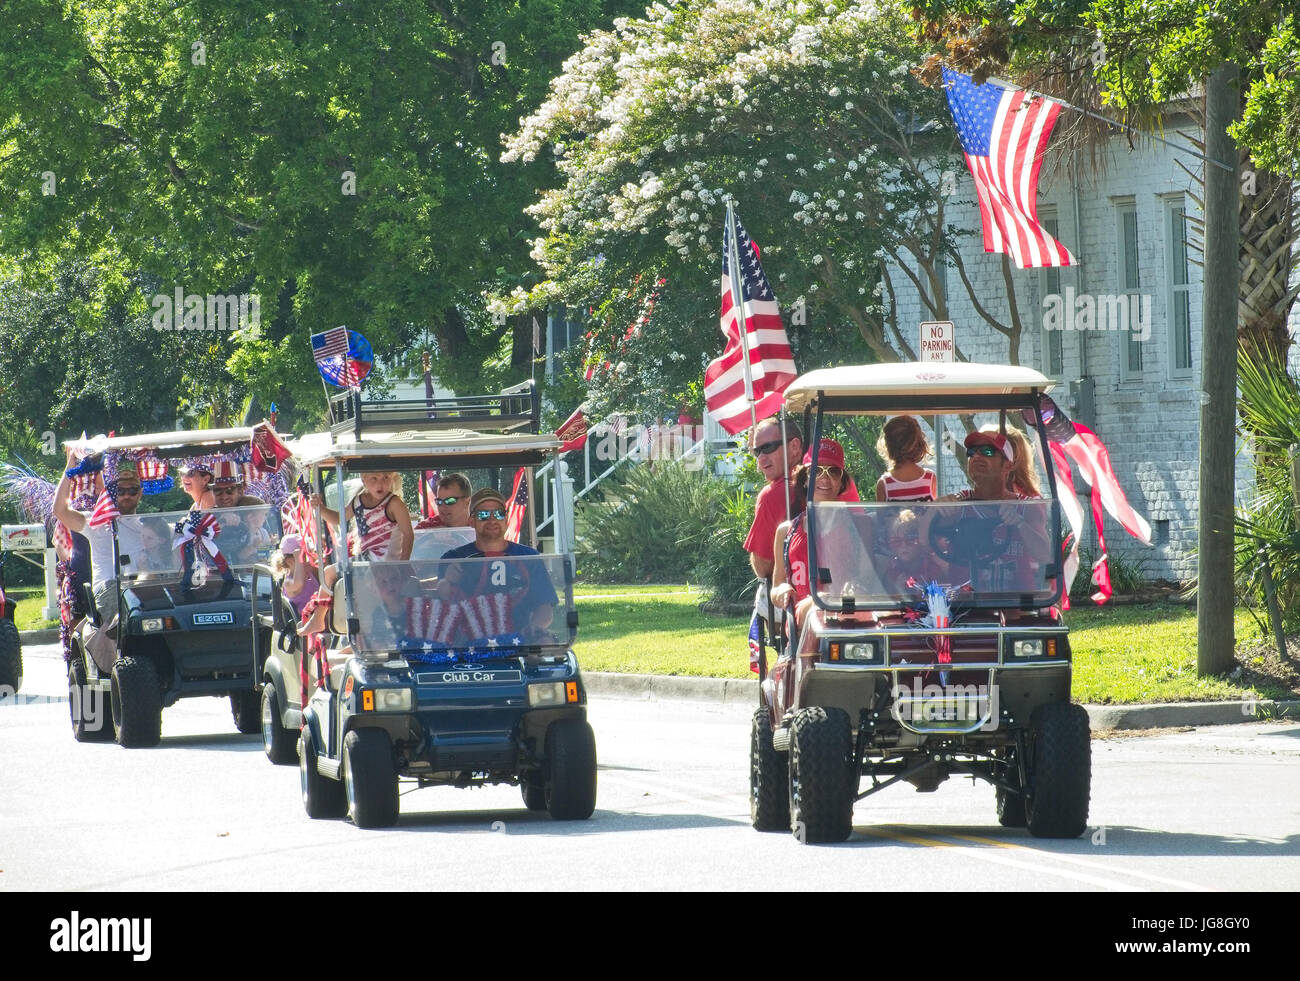 Sullivan's Island, South Carolina, USA. 4th July, 2017. Families ride decorated golf cart during the annual Sullivan's Island Independence Day parade July 4, 2017 in Sullivan's Island, South Carolina. The tiny affluent sea island hosts a bicycle and golf cart parade through the historic village. Credit: Planetpix/Alamy Live News Stock Photo